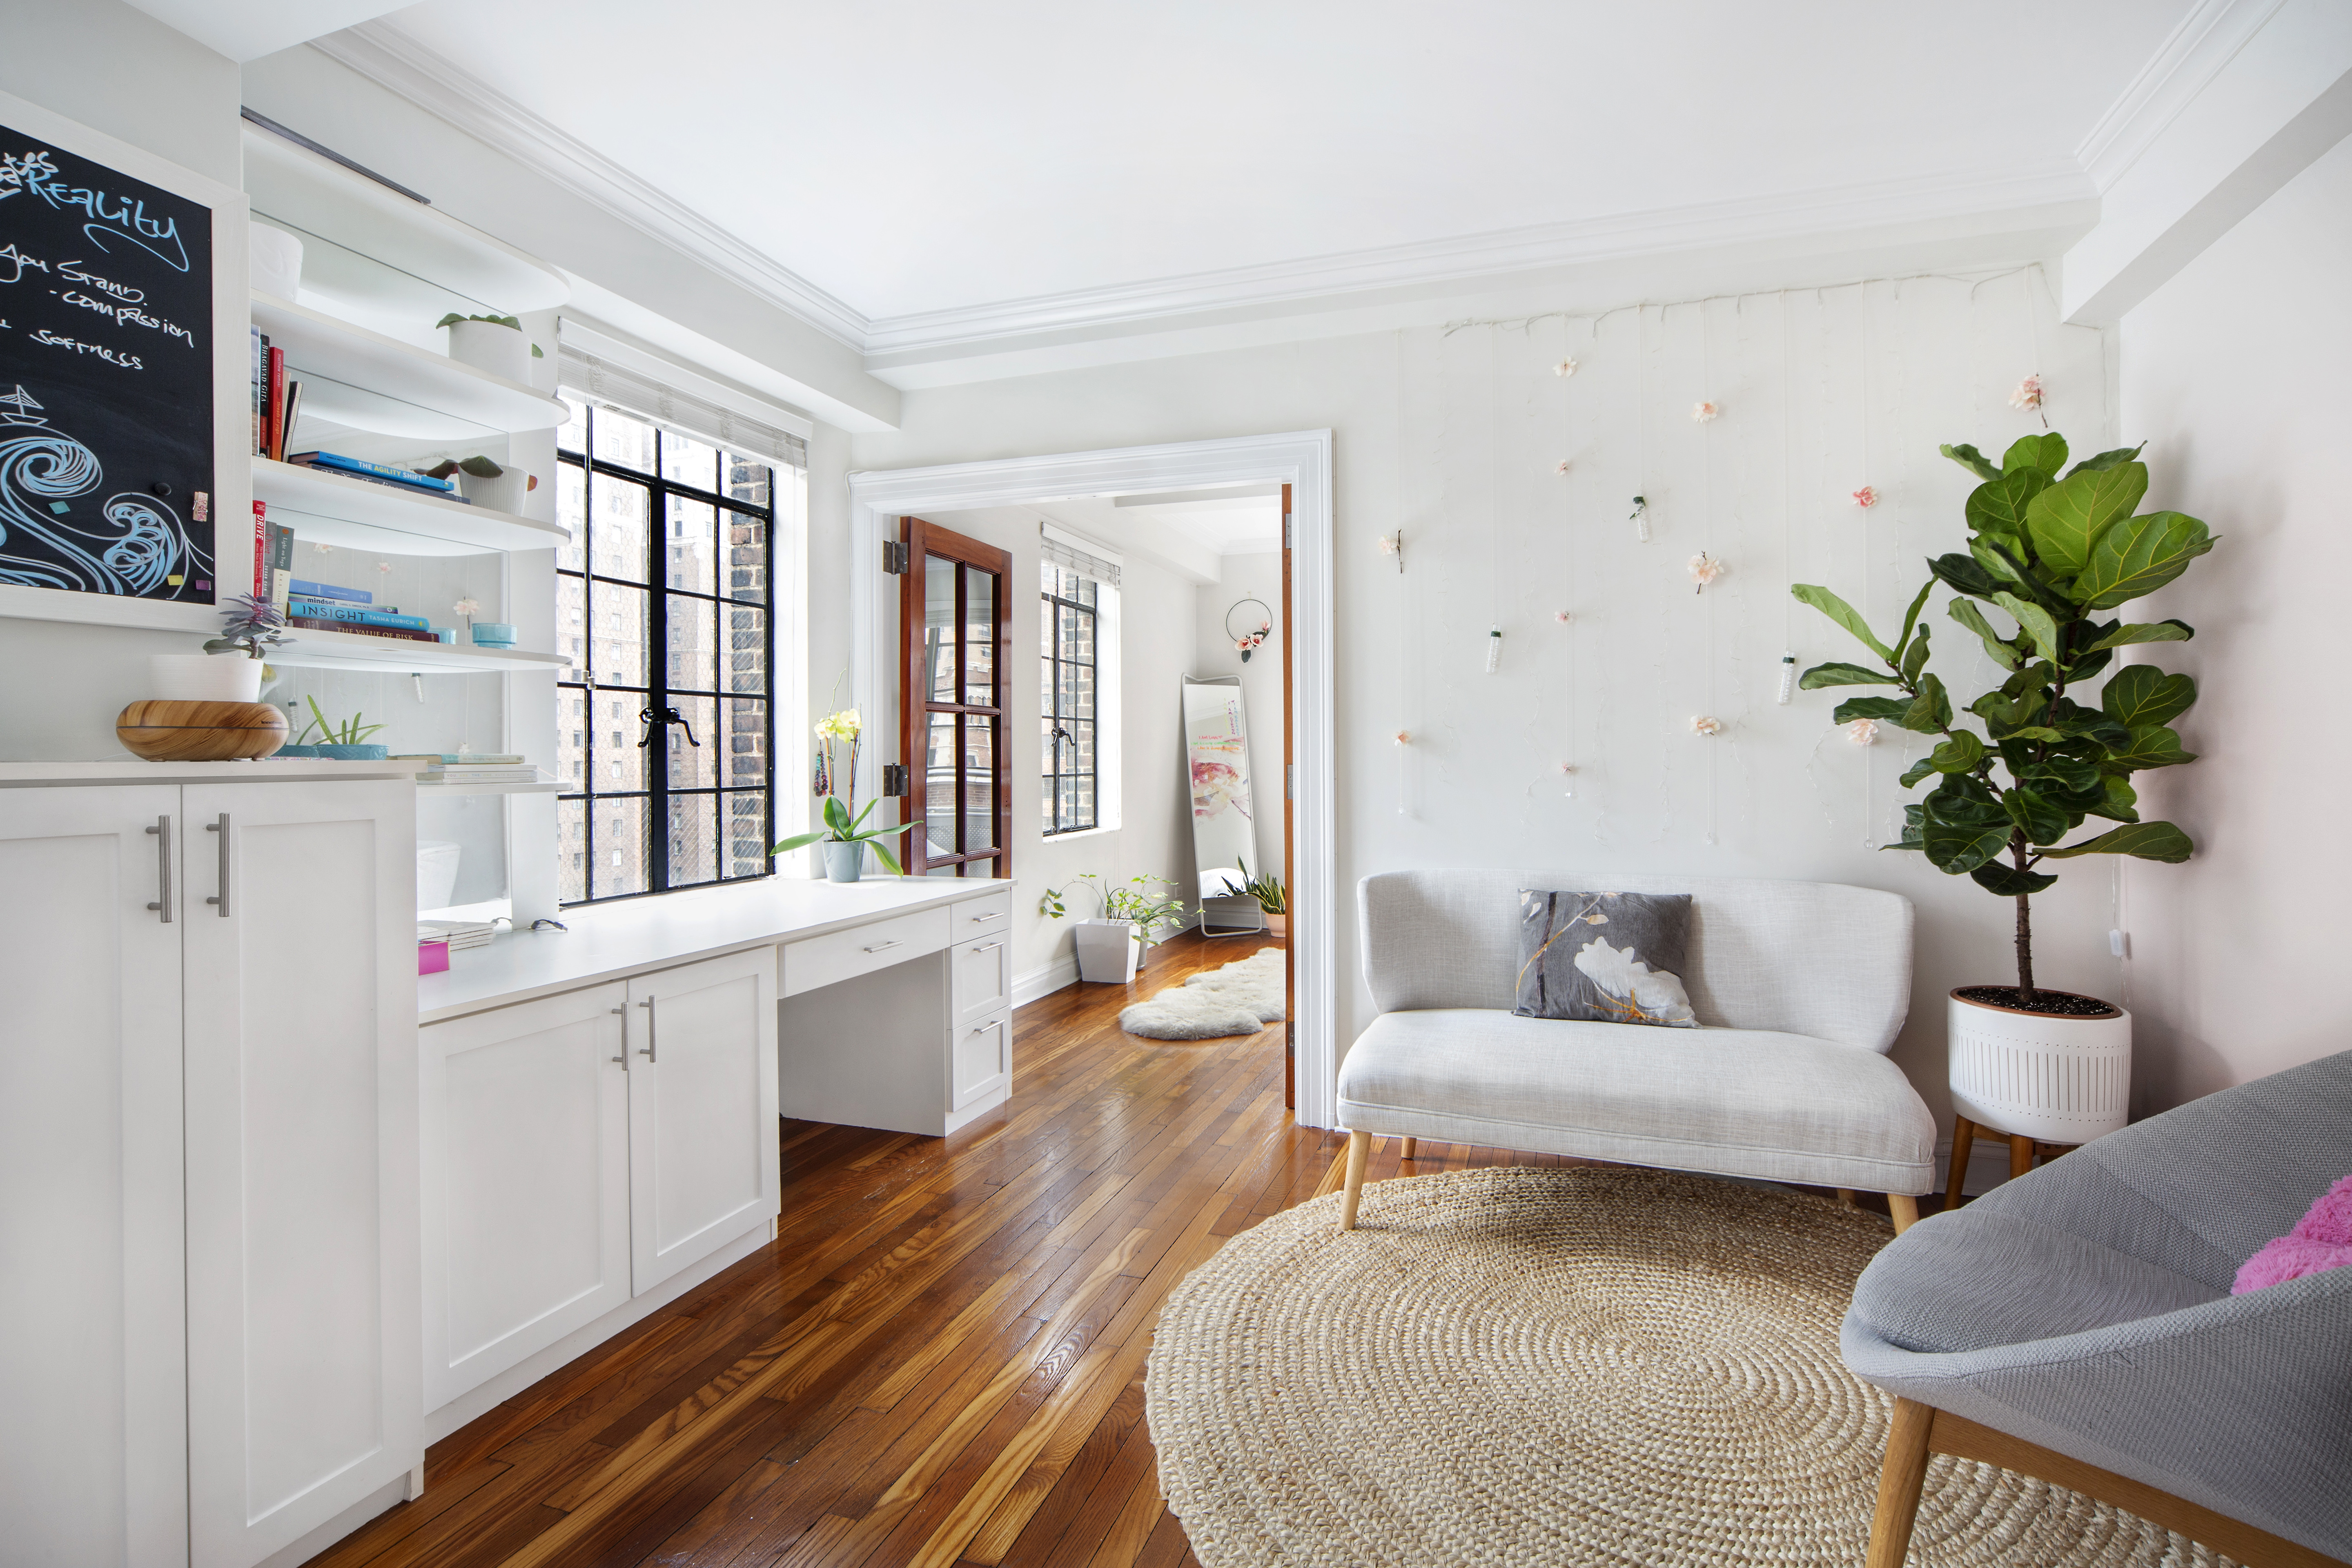 A white living area with casement windows and white built-in cabinets on the east wall.